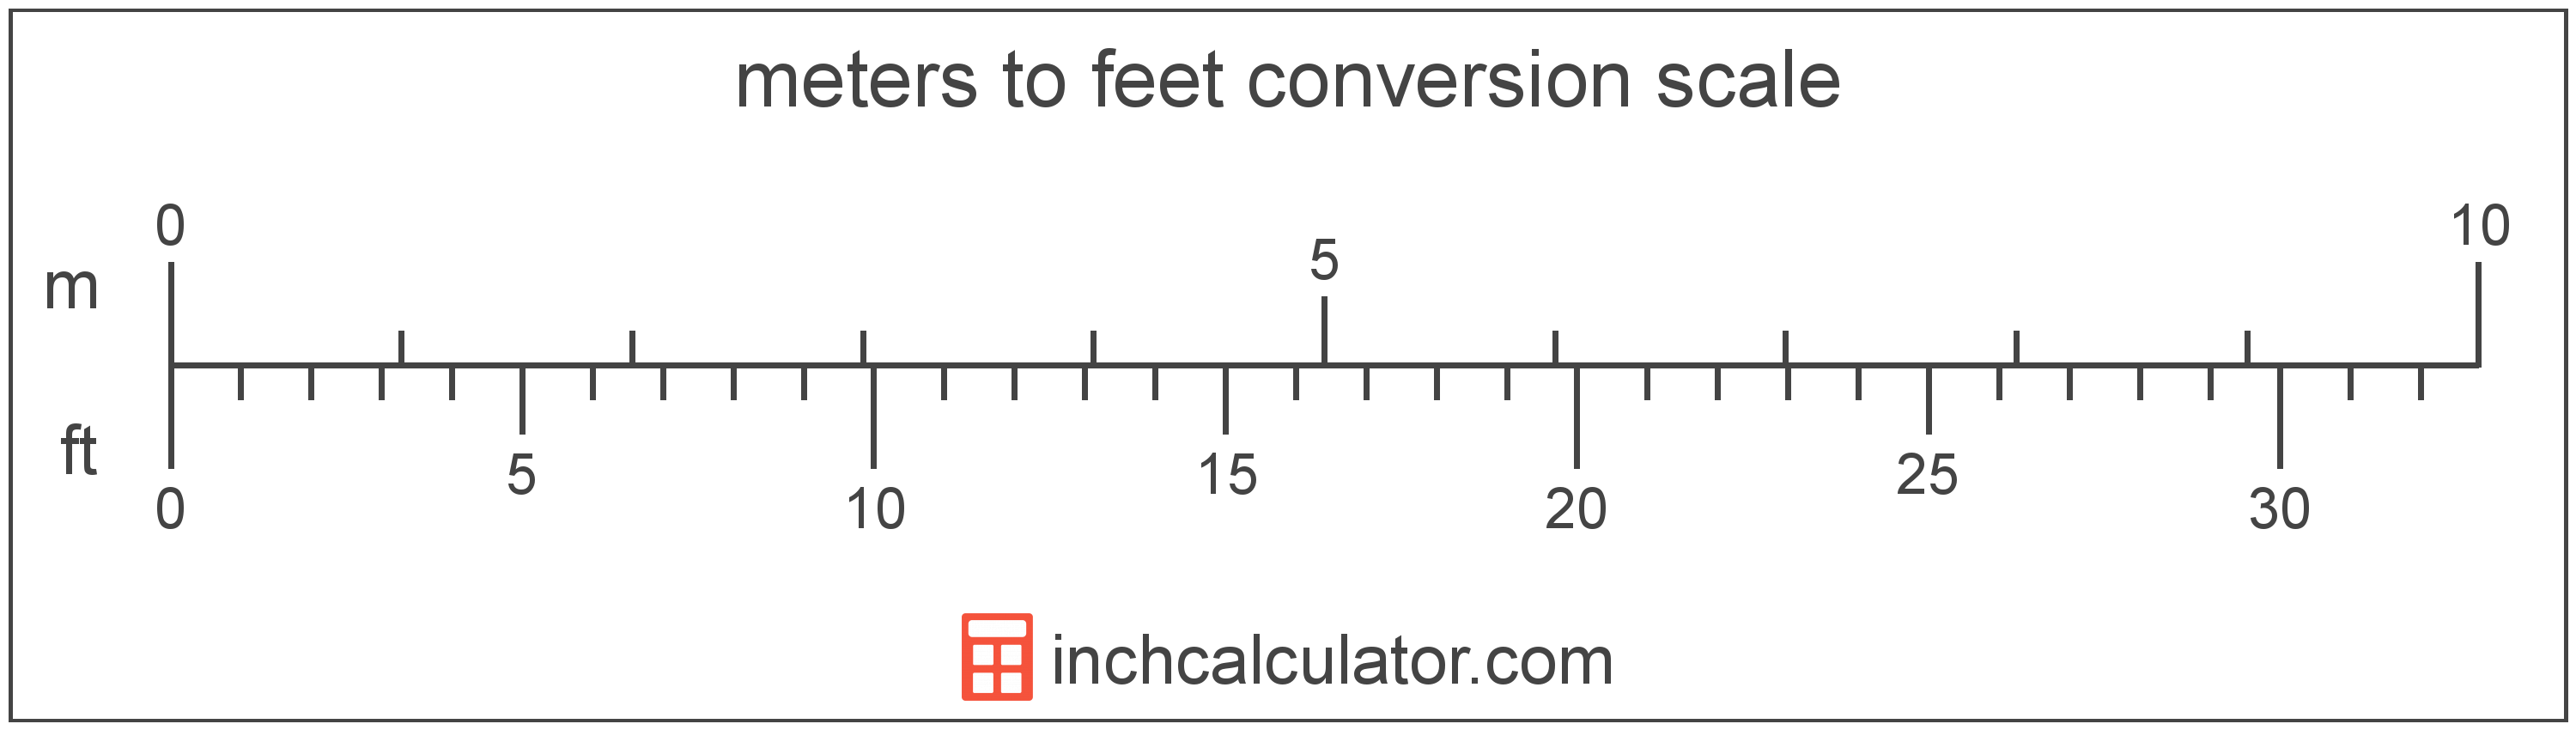 Meters to Feet Conversion (m to ft) - Inch Calculator